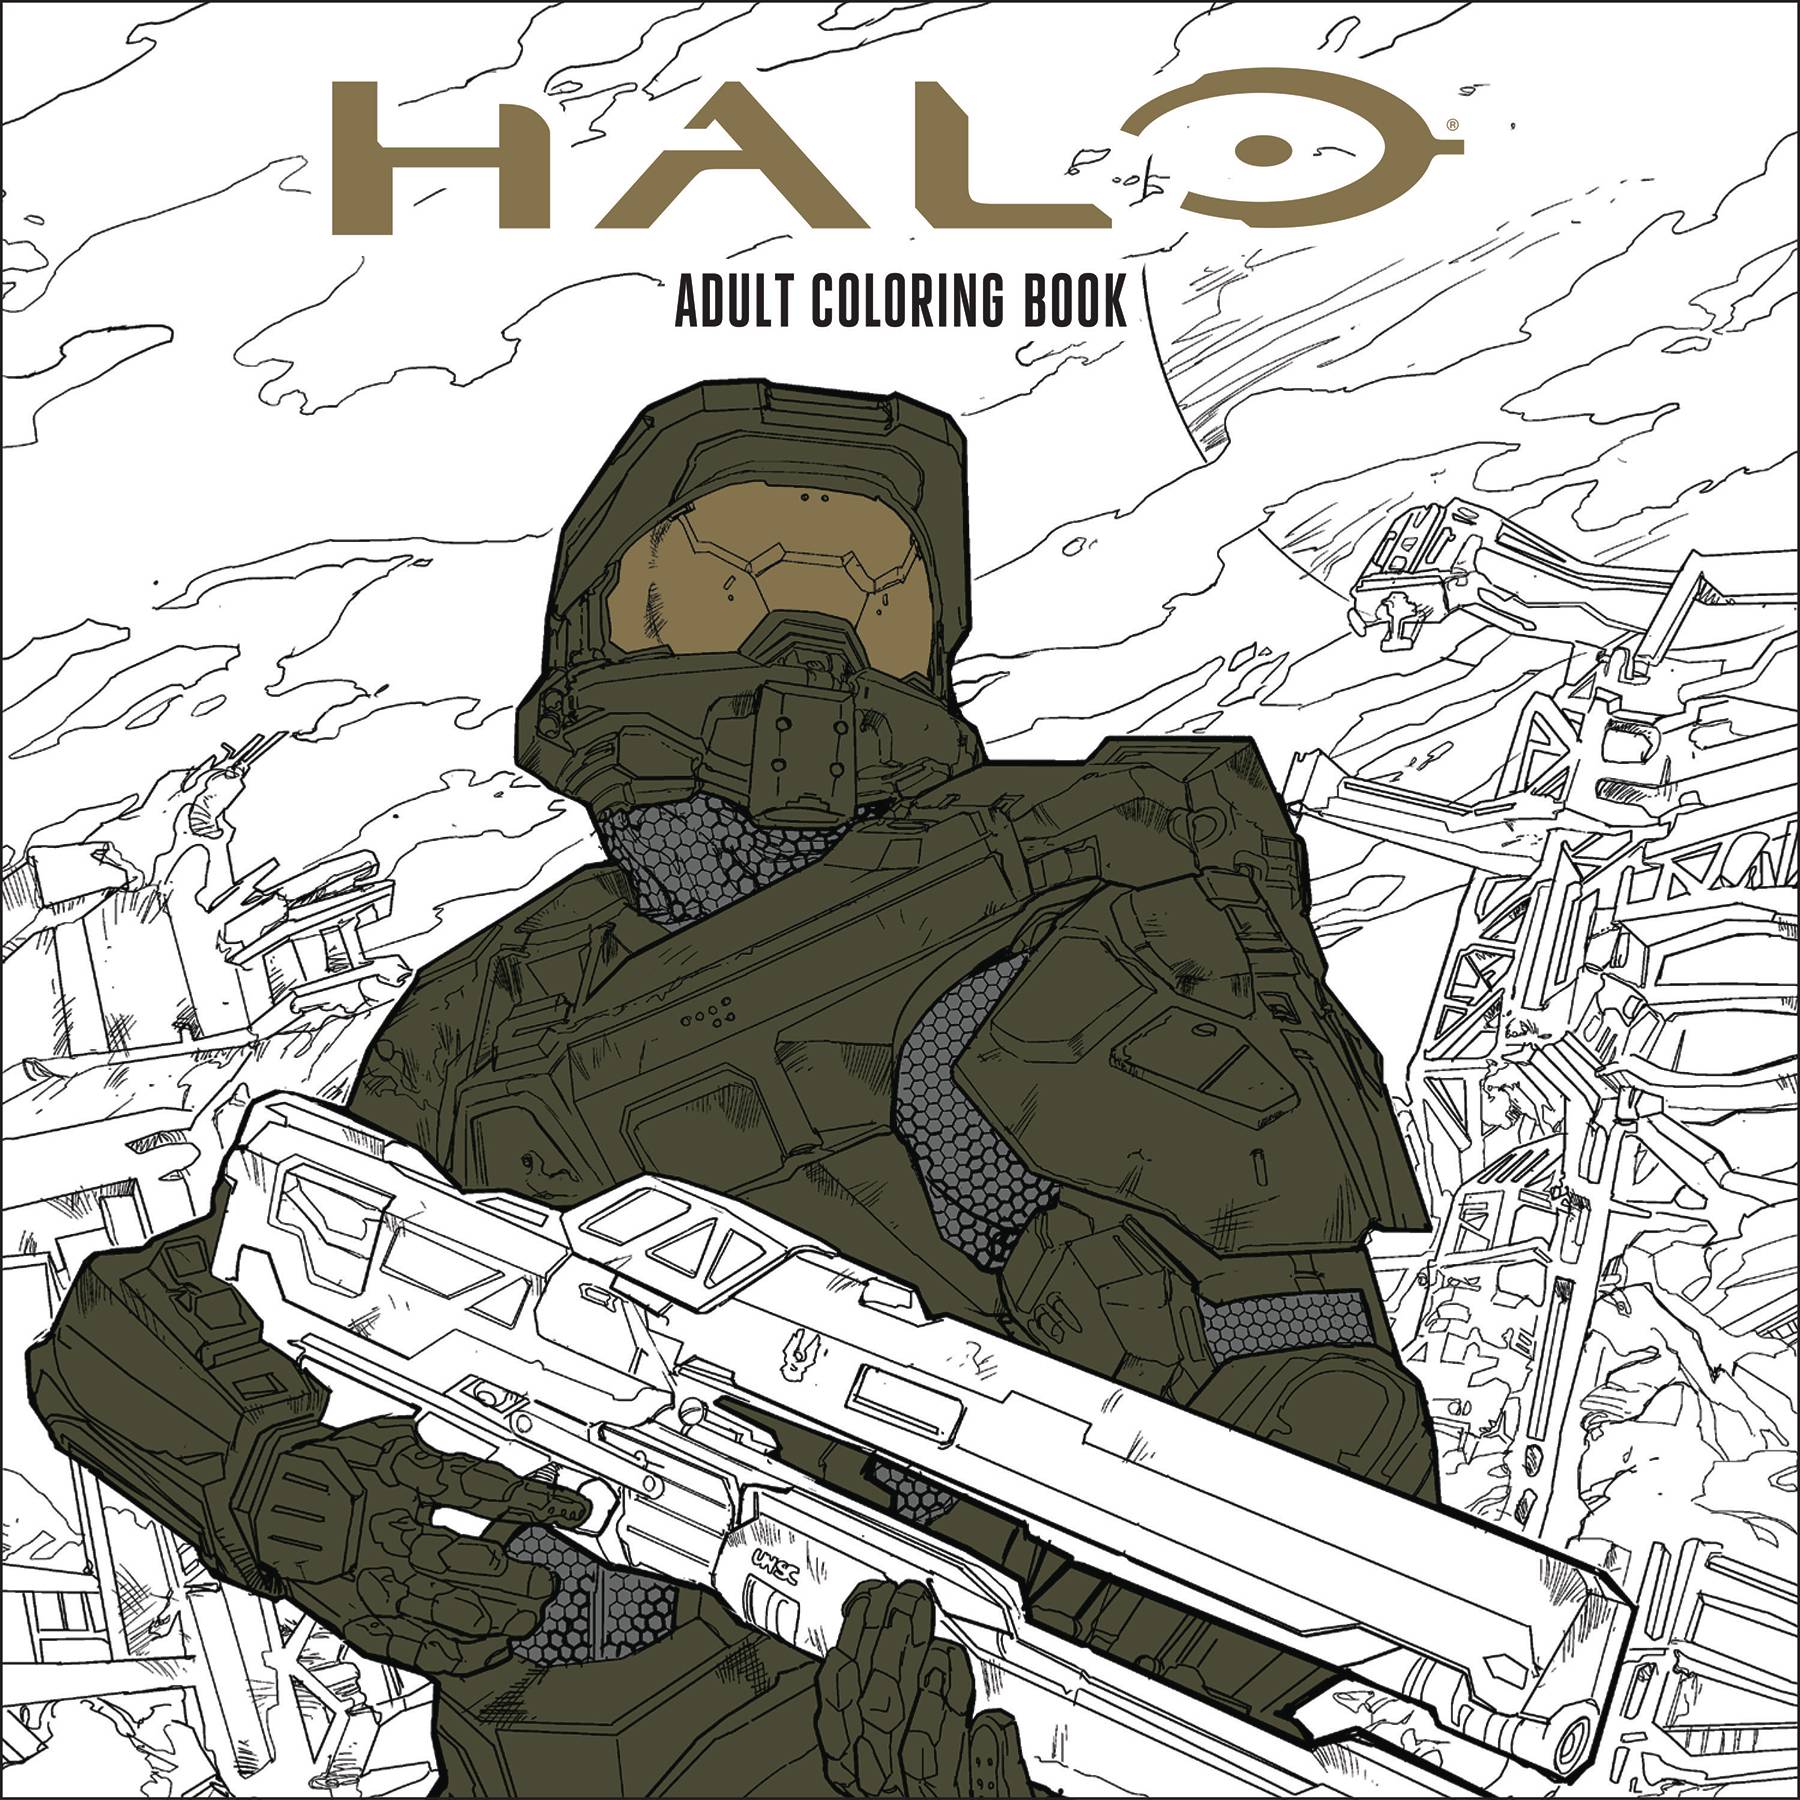 HALO ADULT COLORING BOOK TP